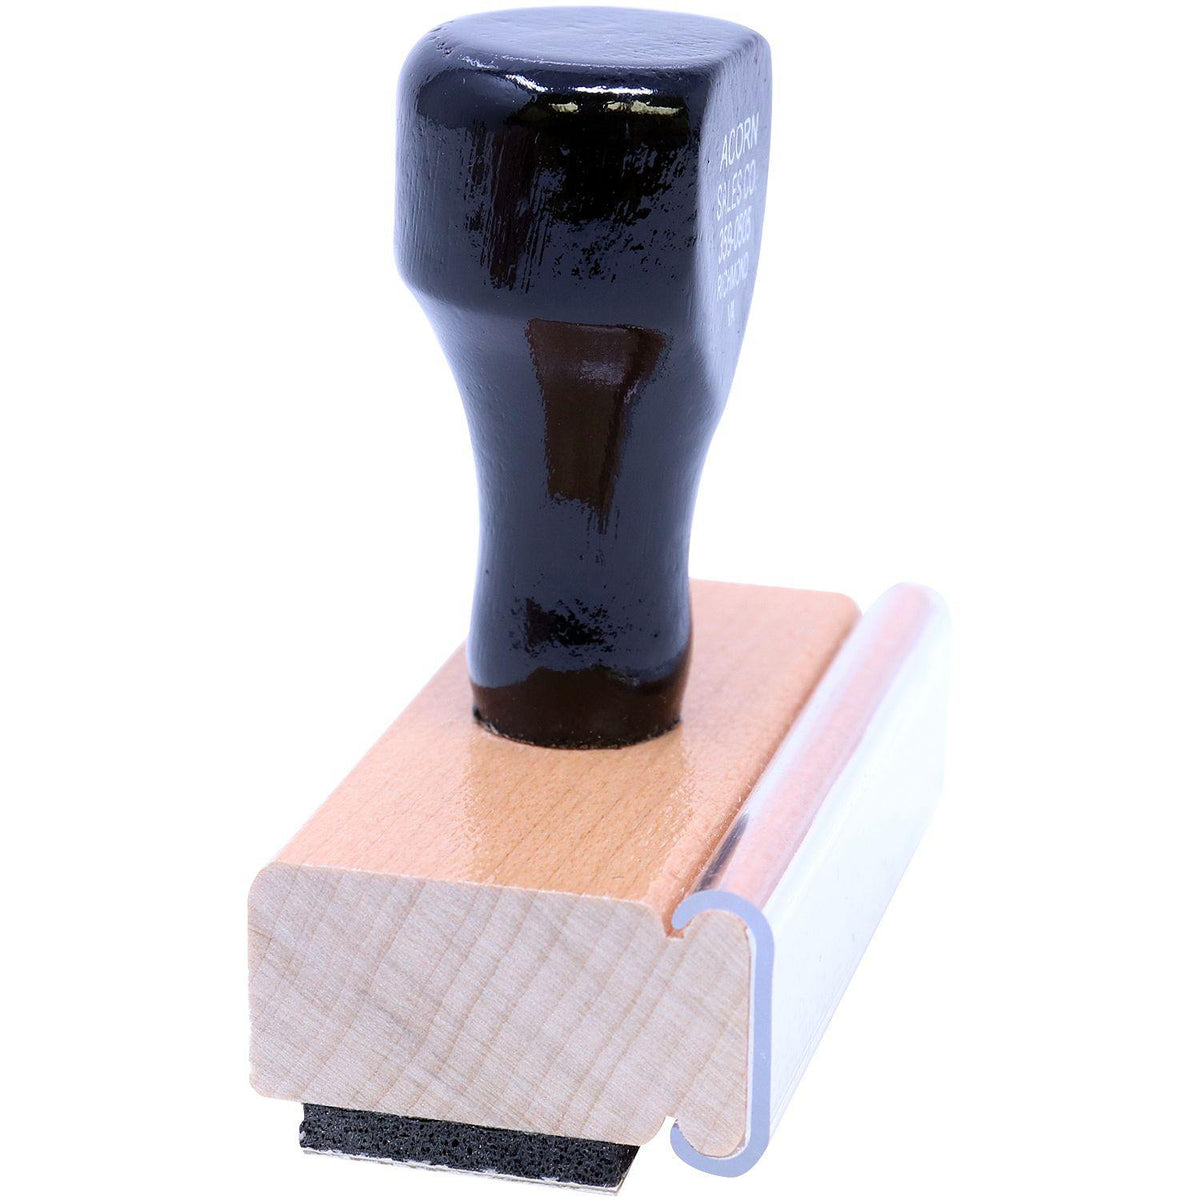 Side View of Large For Deposit Only Rubber Stamp at an Angle